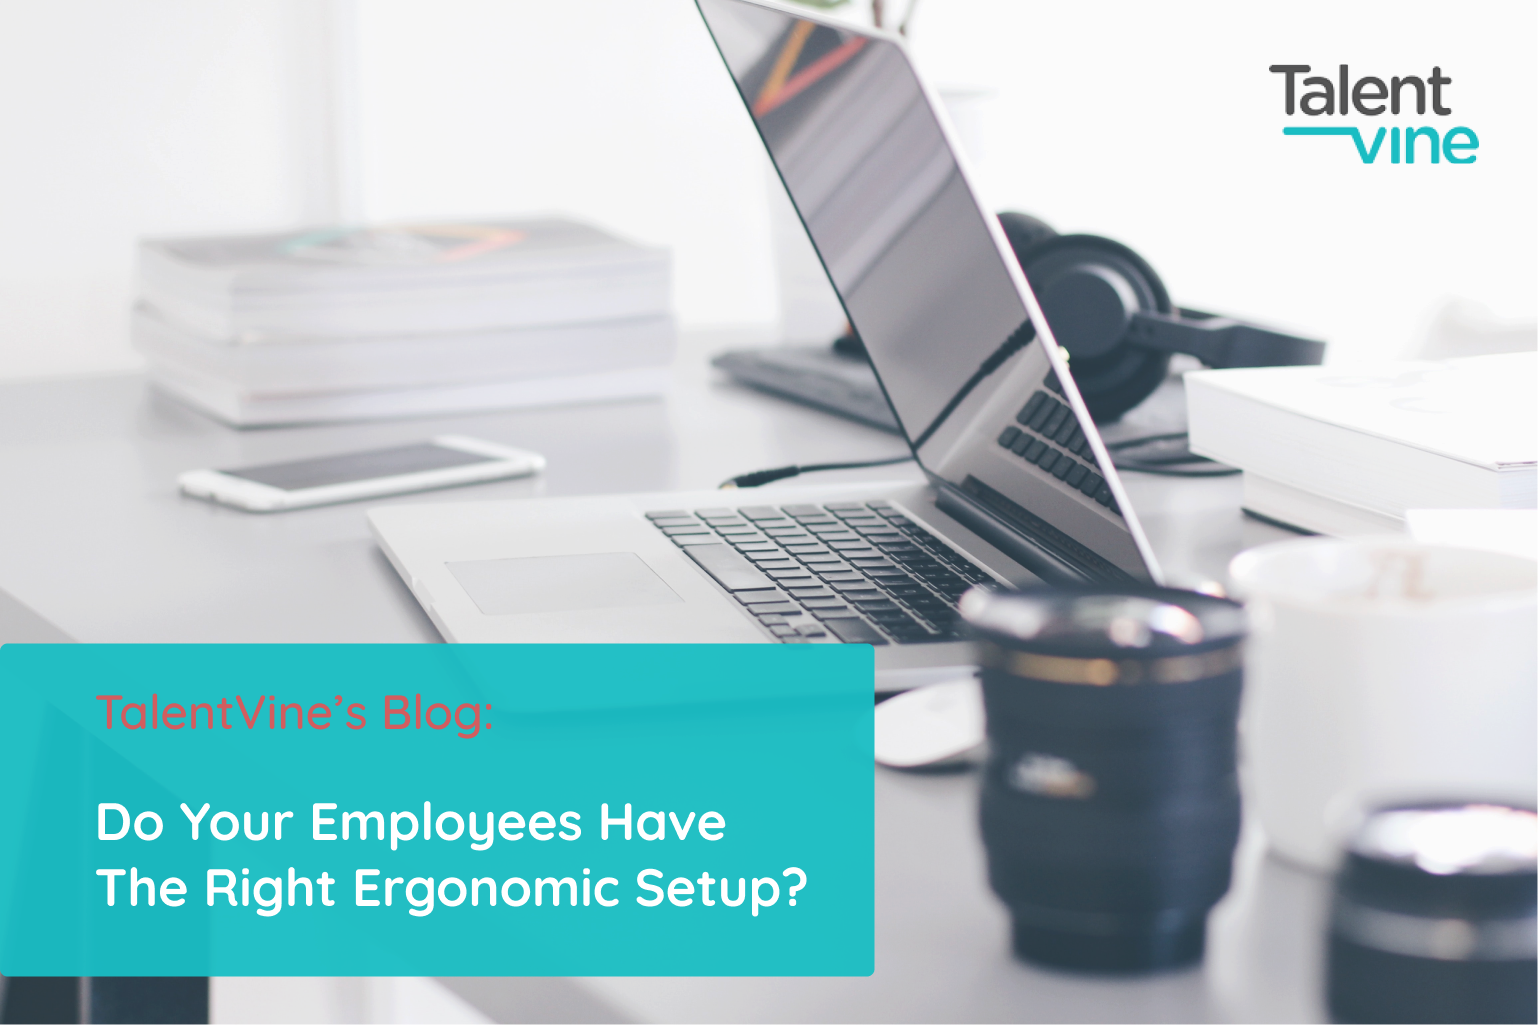 Do your employees have the right ergonomic setup